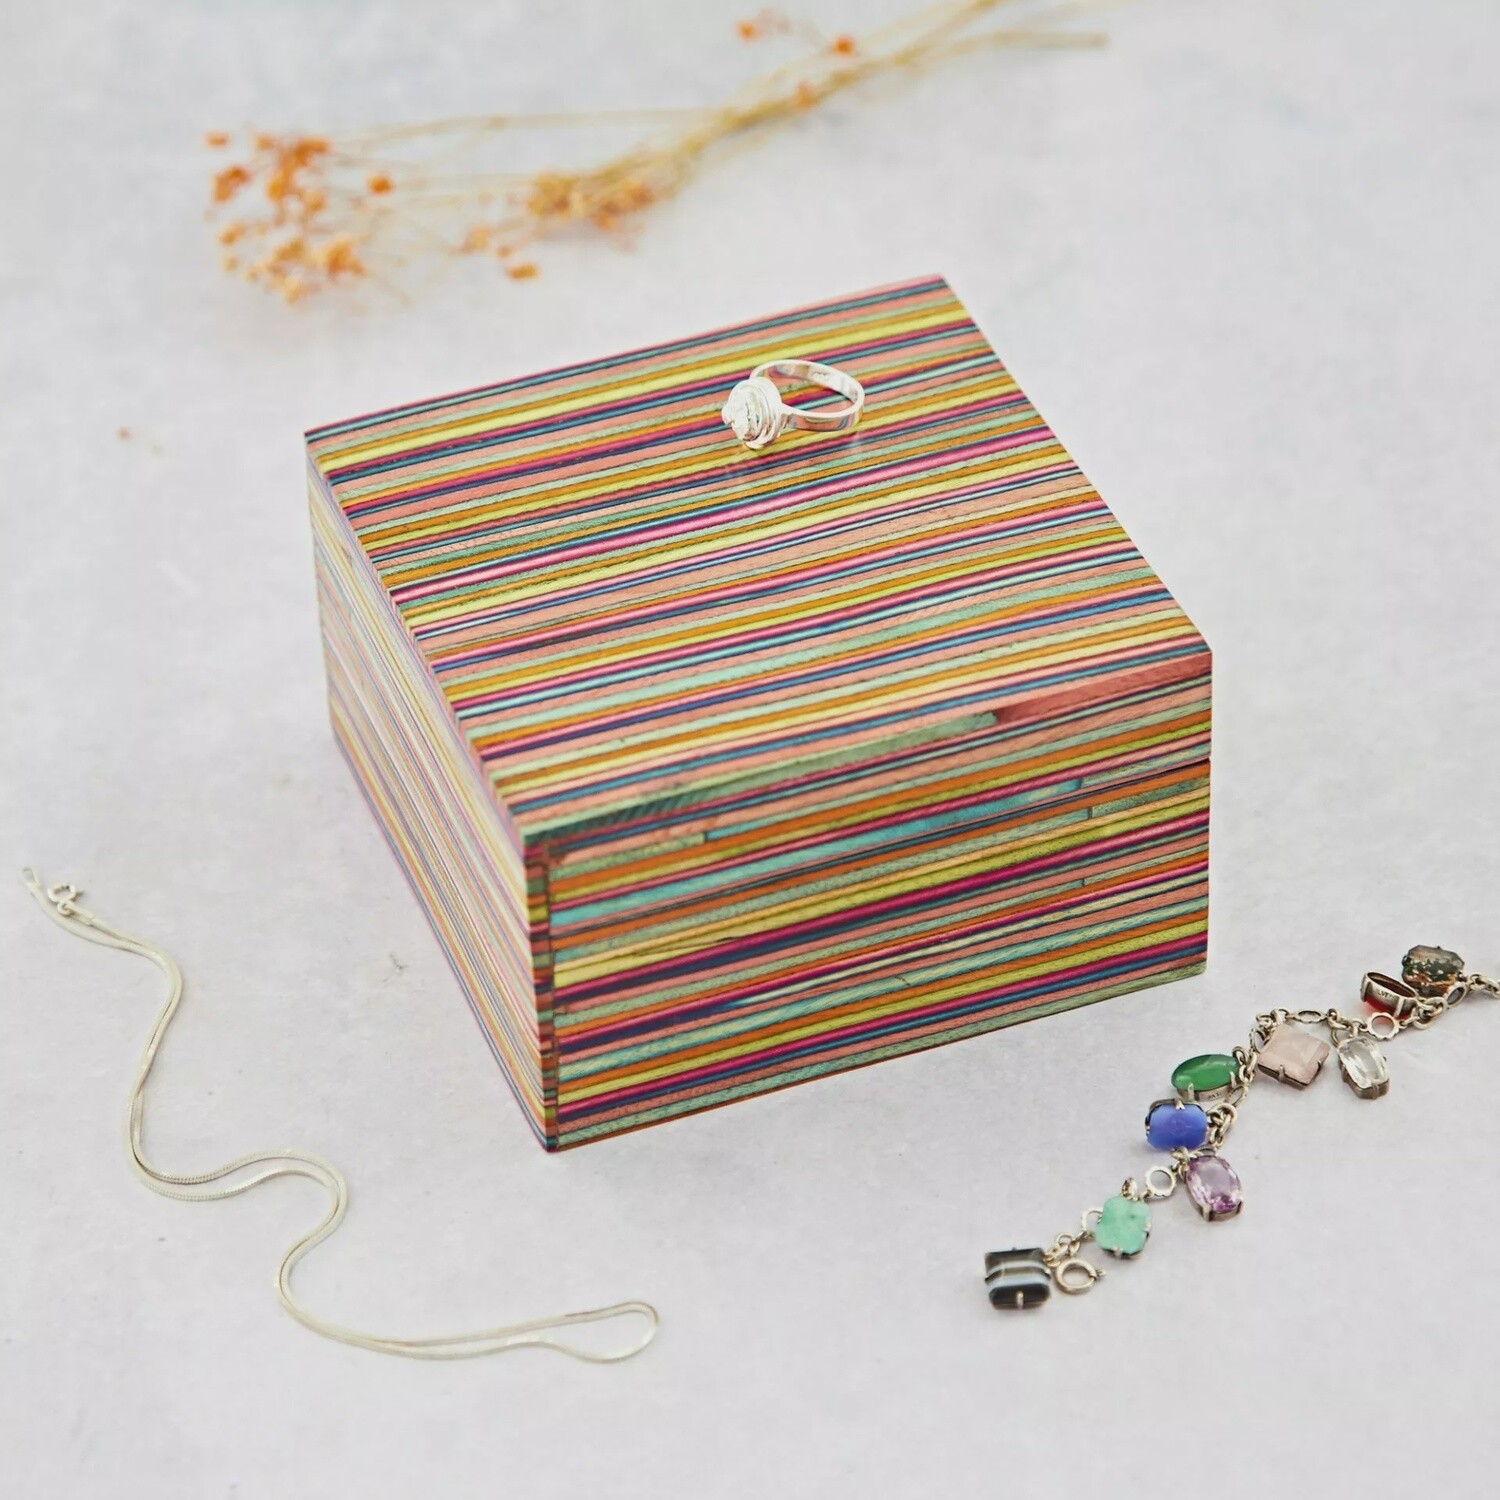 Dhari Multicoloured Wooden Box - Large by Paper High